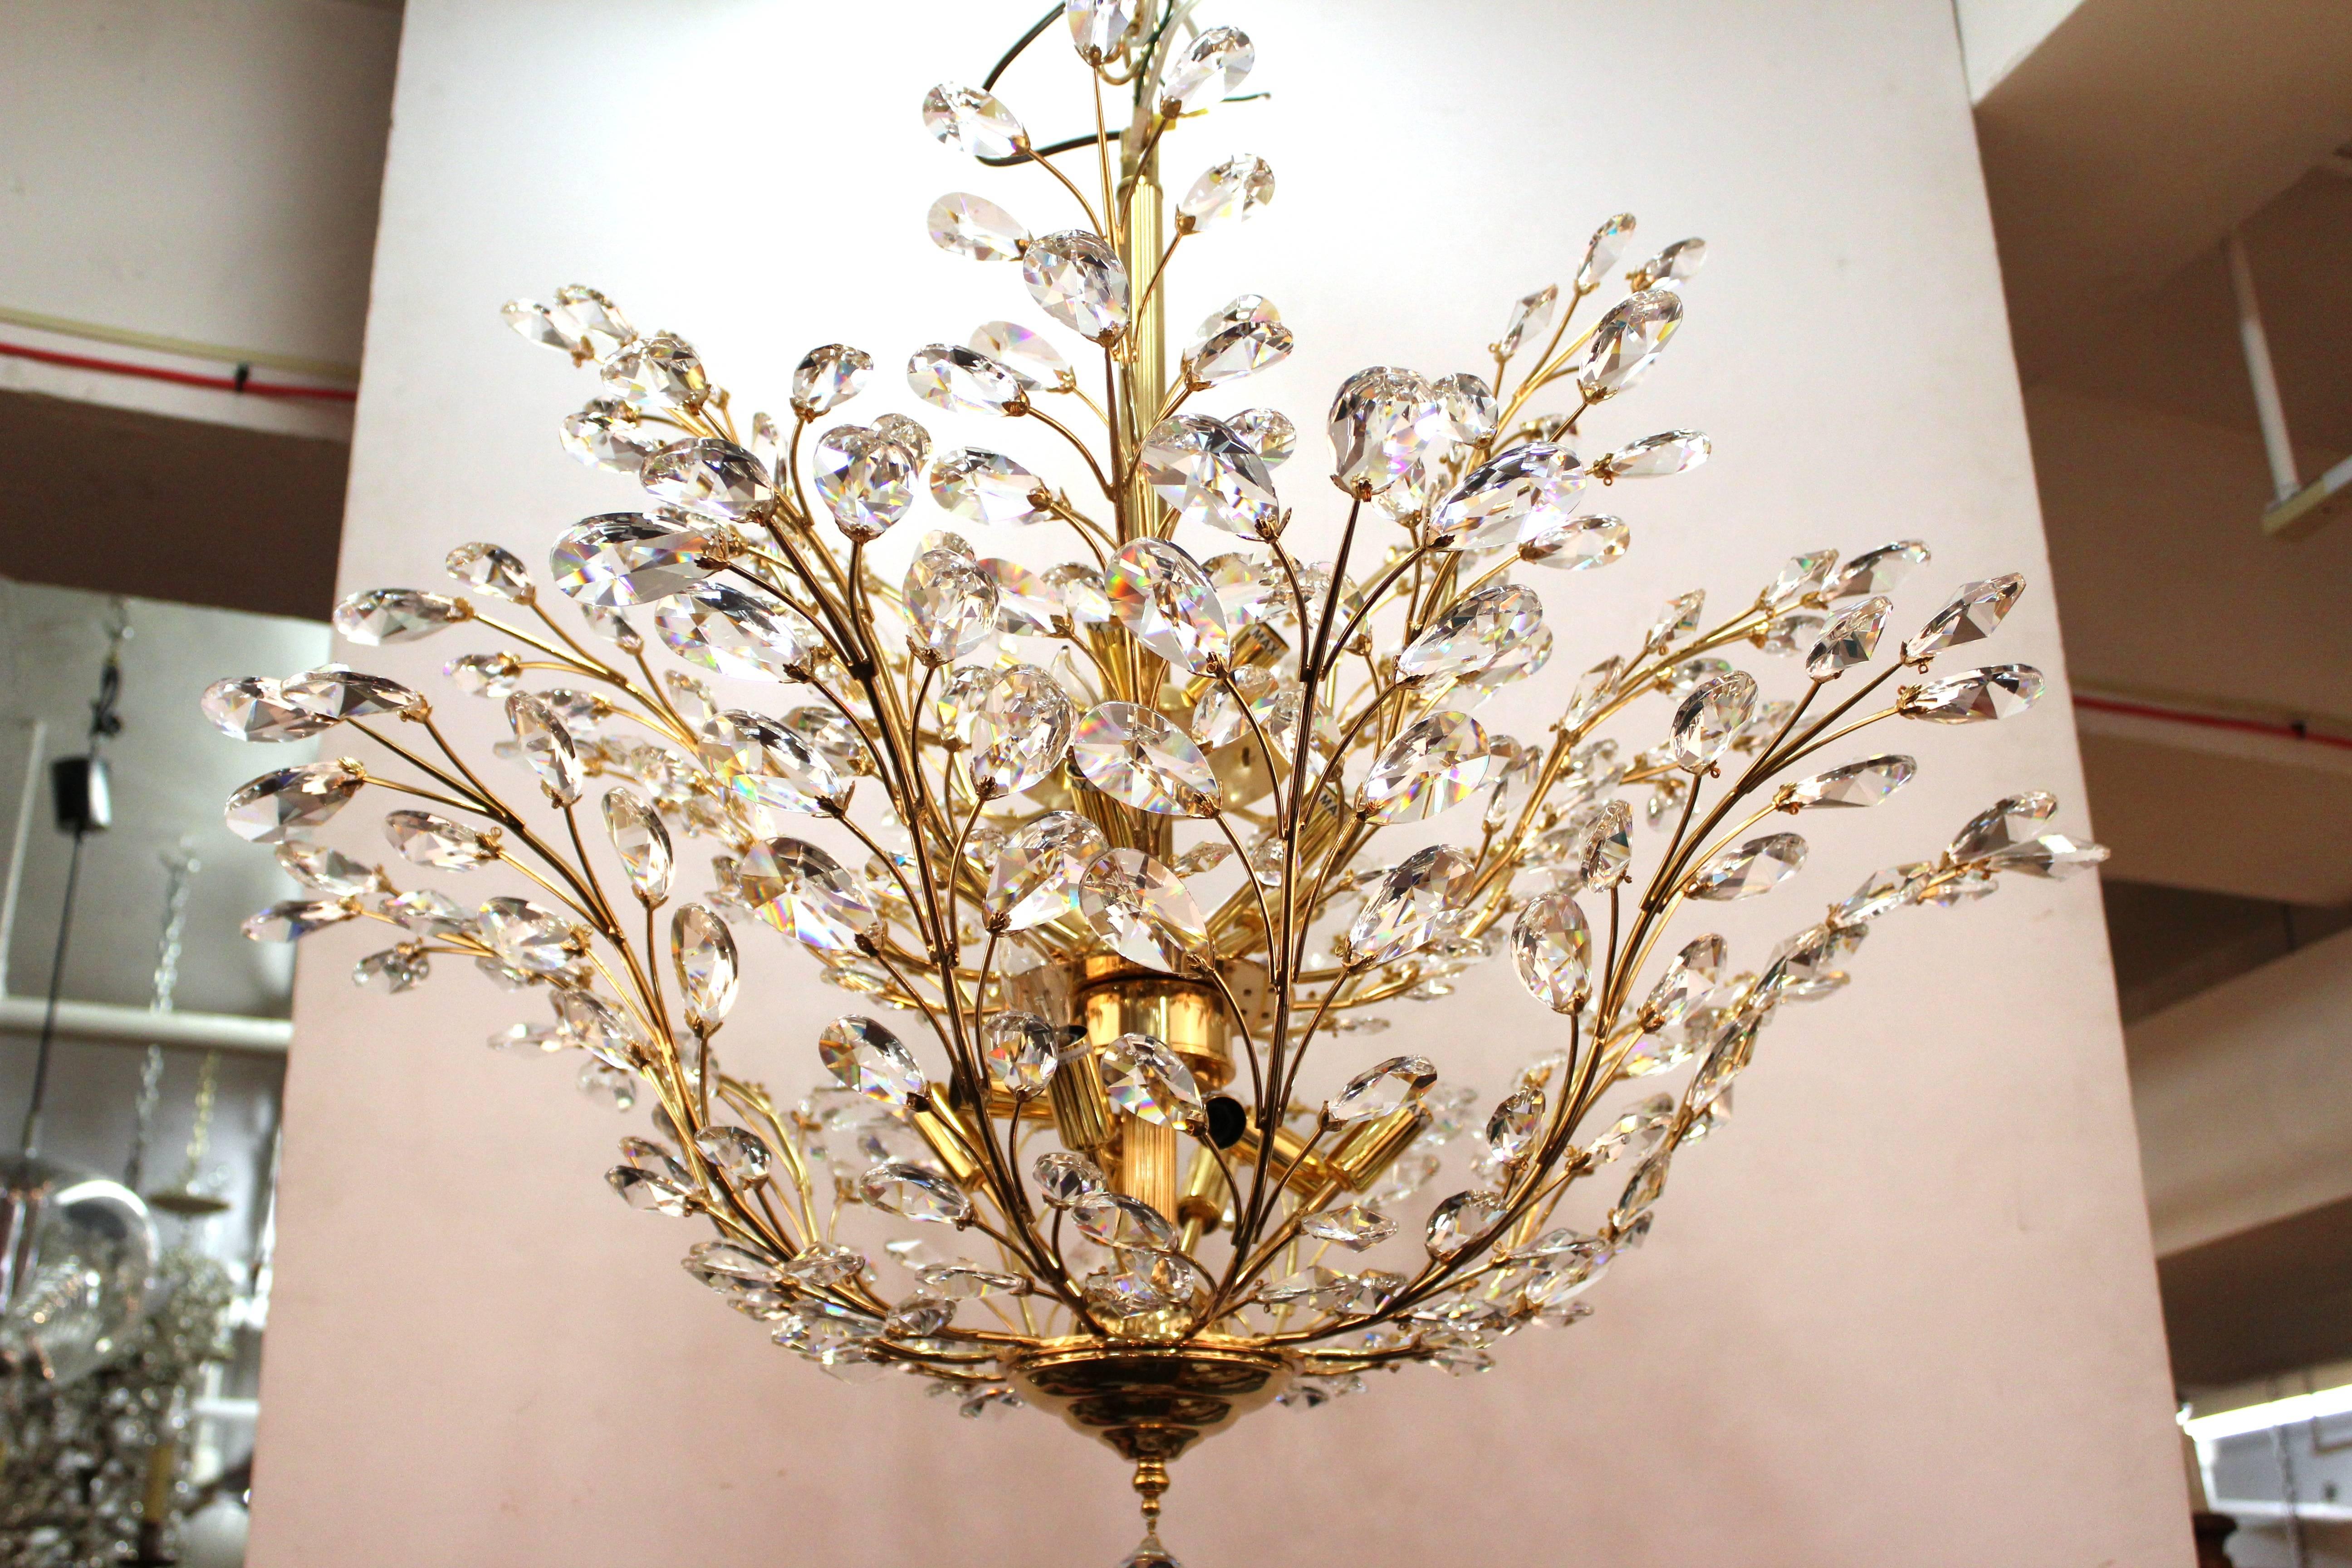 Mid-century 1950s Italian 24k gold plated brass and Swarovski  crystal chandelier. Rewired to US standard. Accepts 16 candelabra base bulbs. Two available for purchase. 